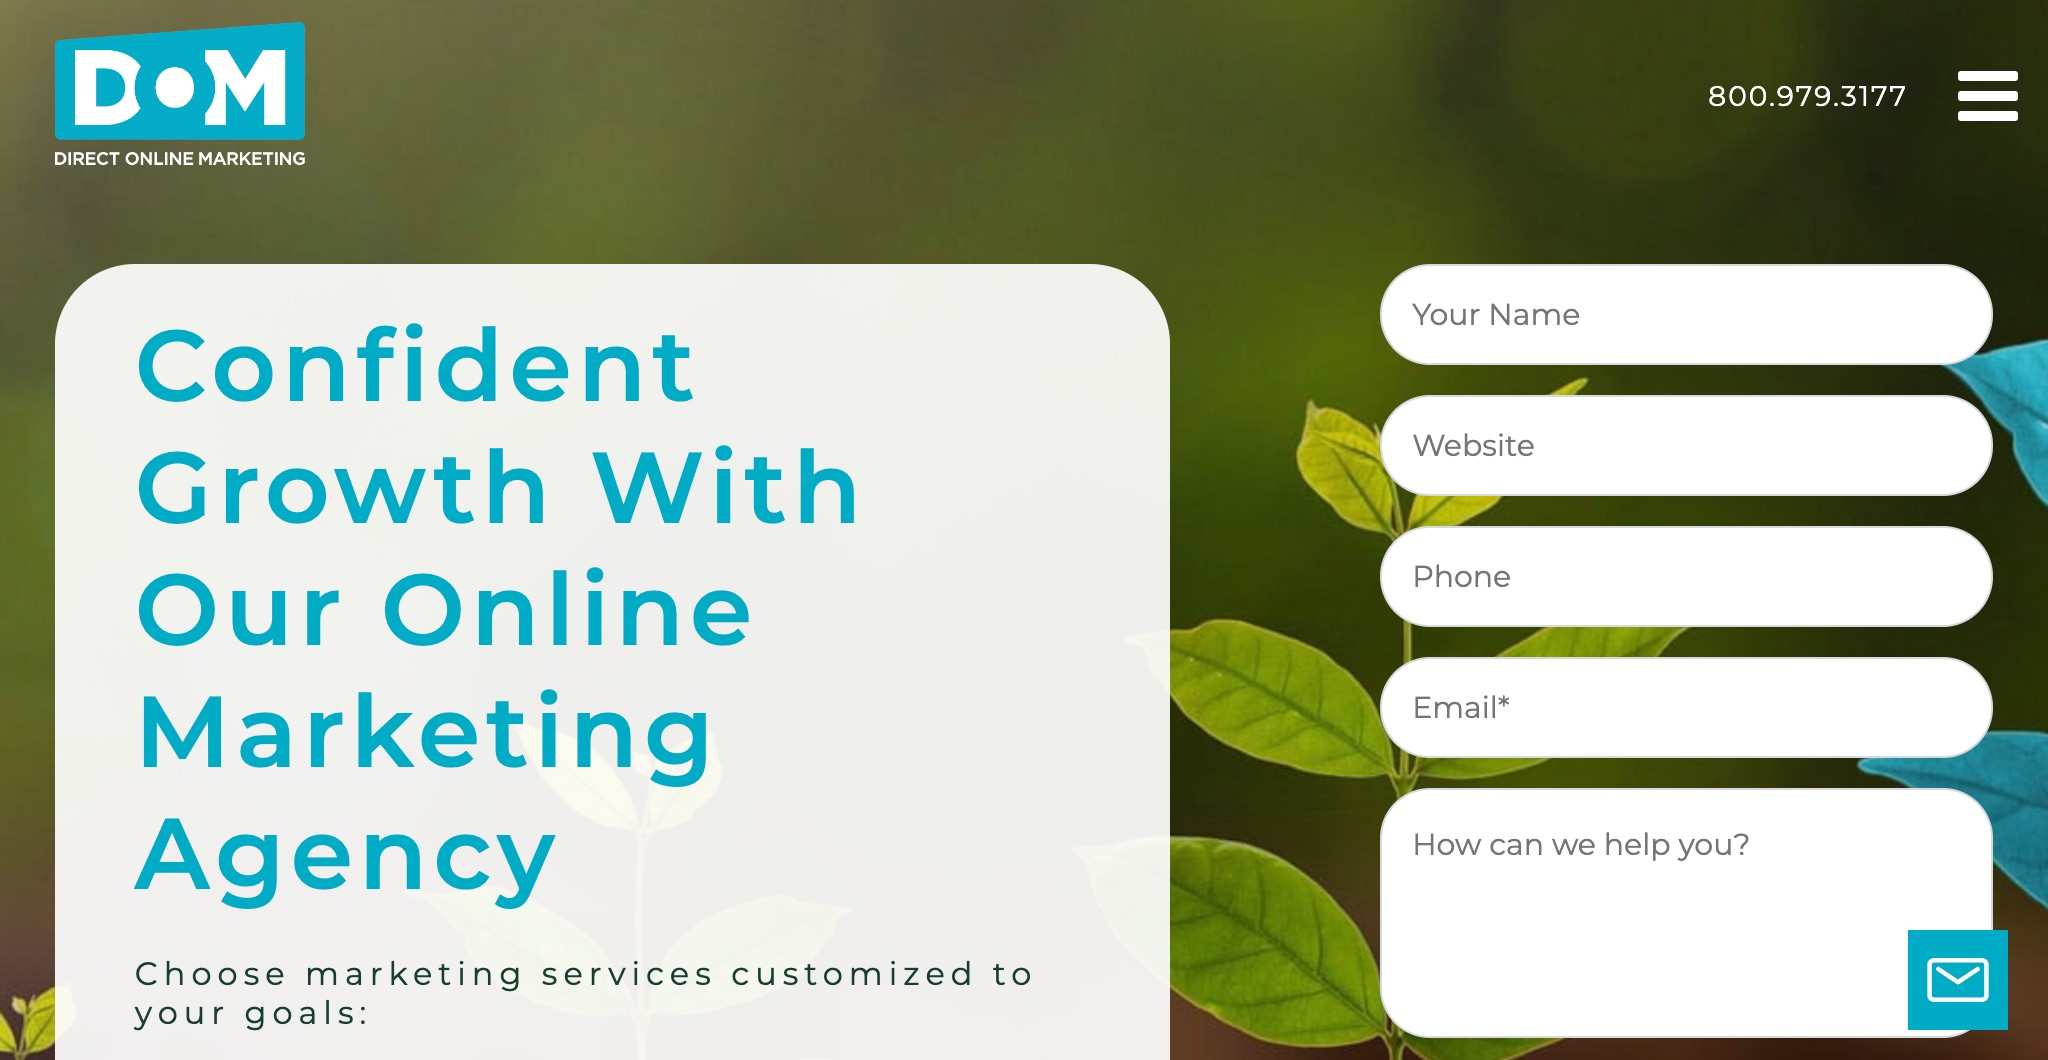 Online Marketing Firm - Custom Services Agency Near Pittsburgh